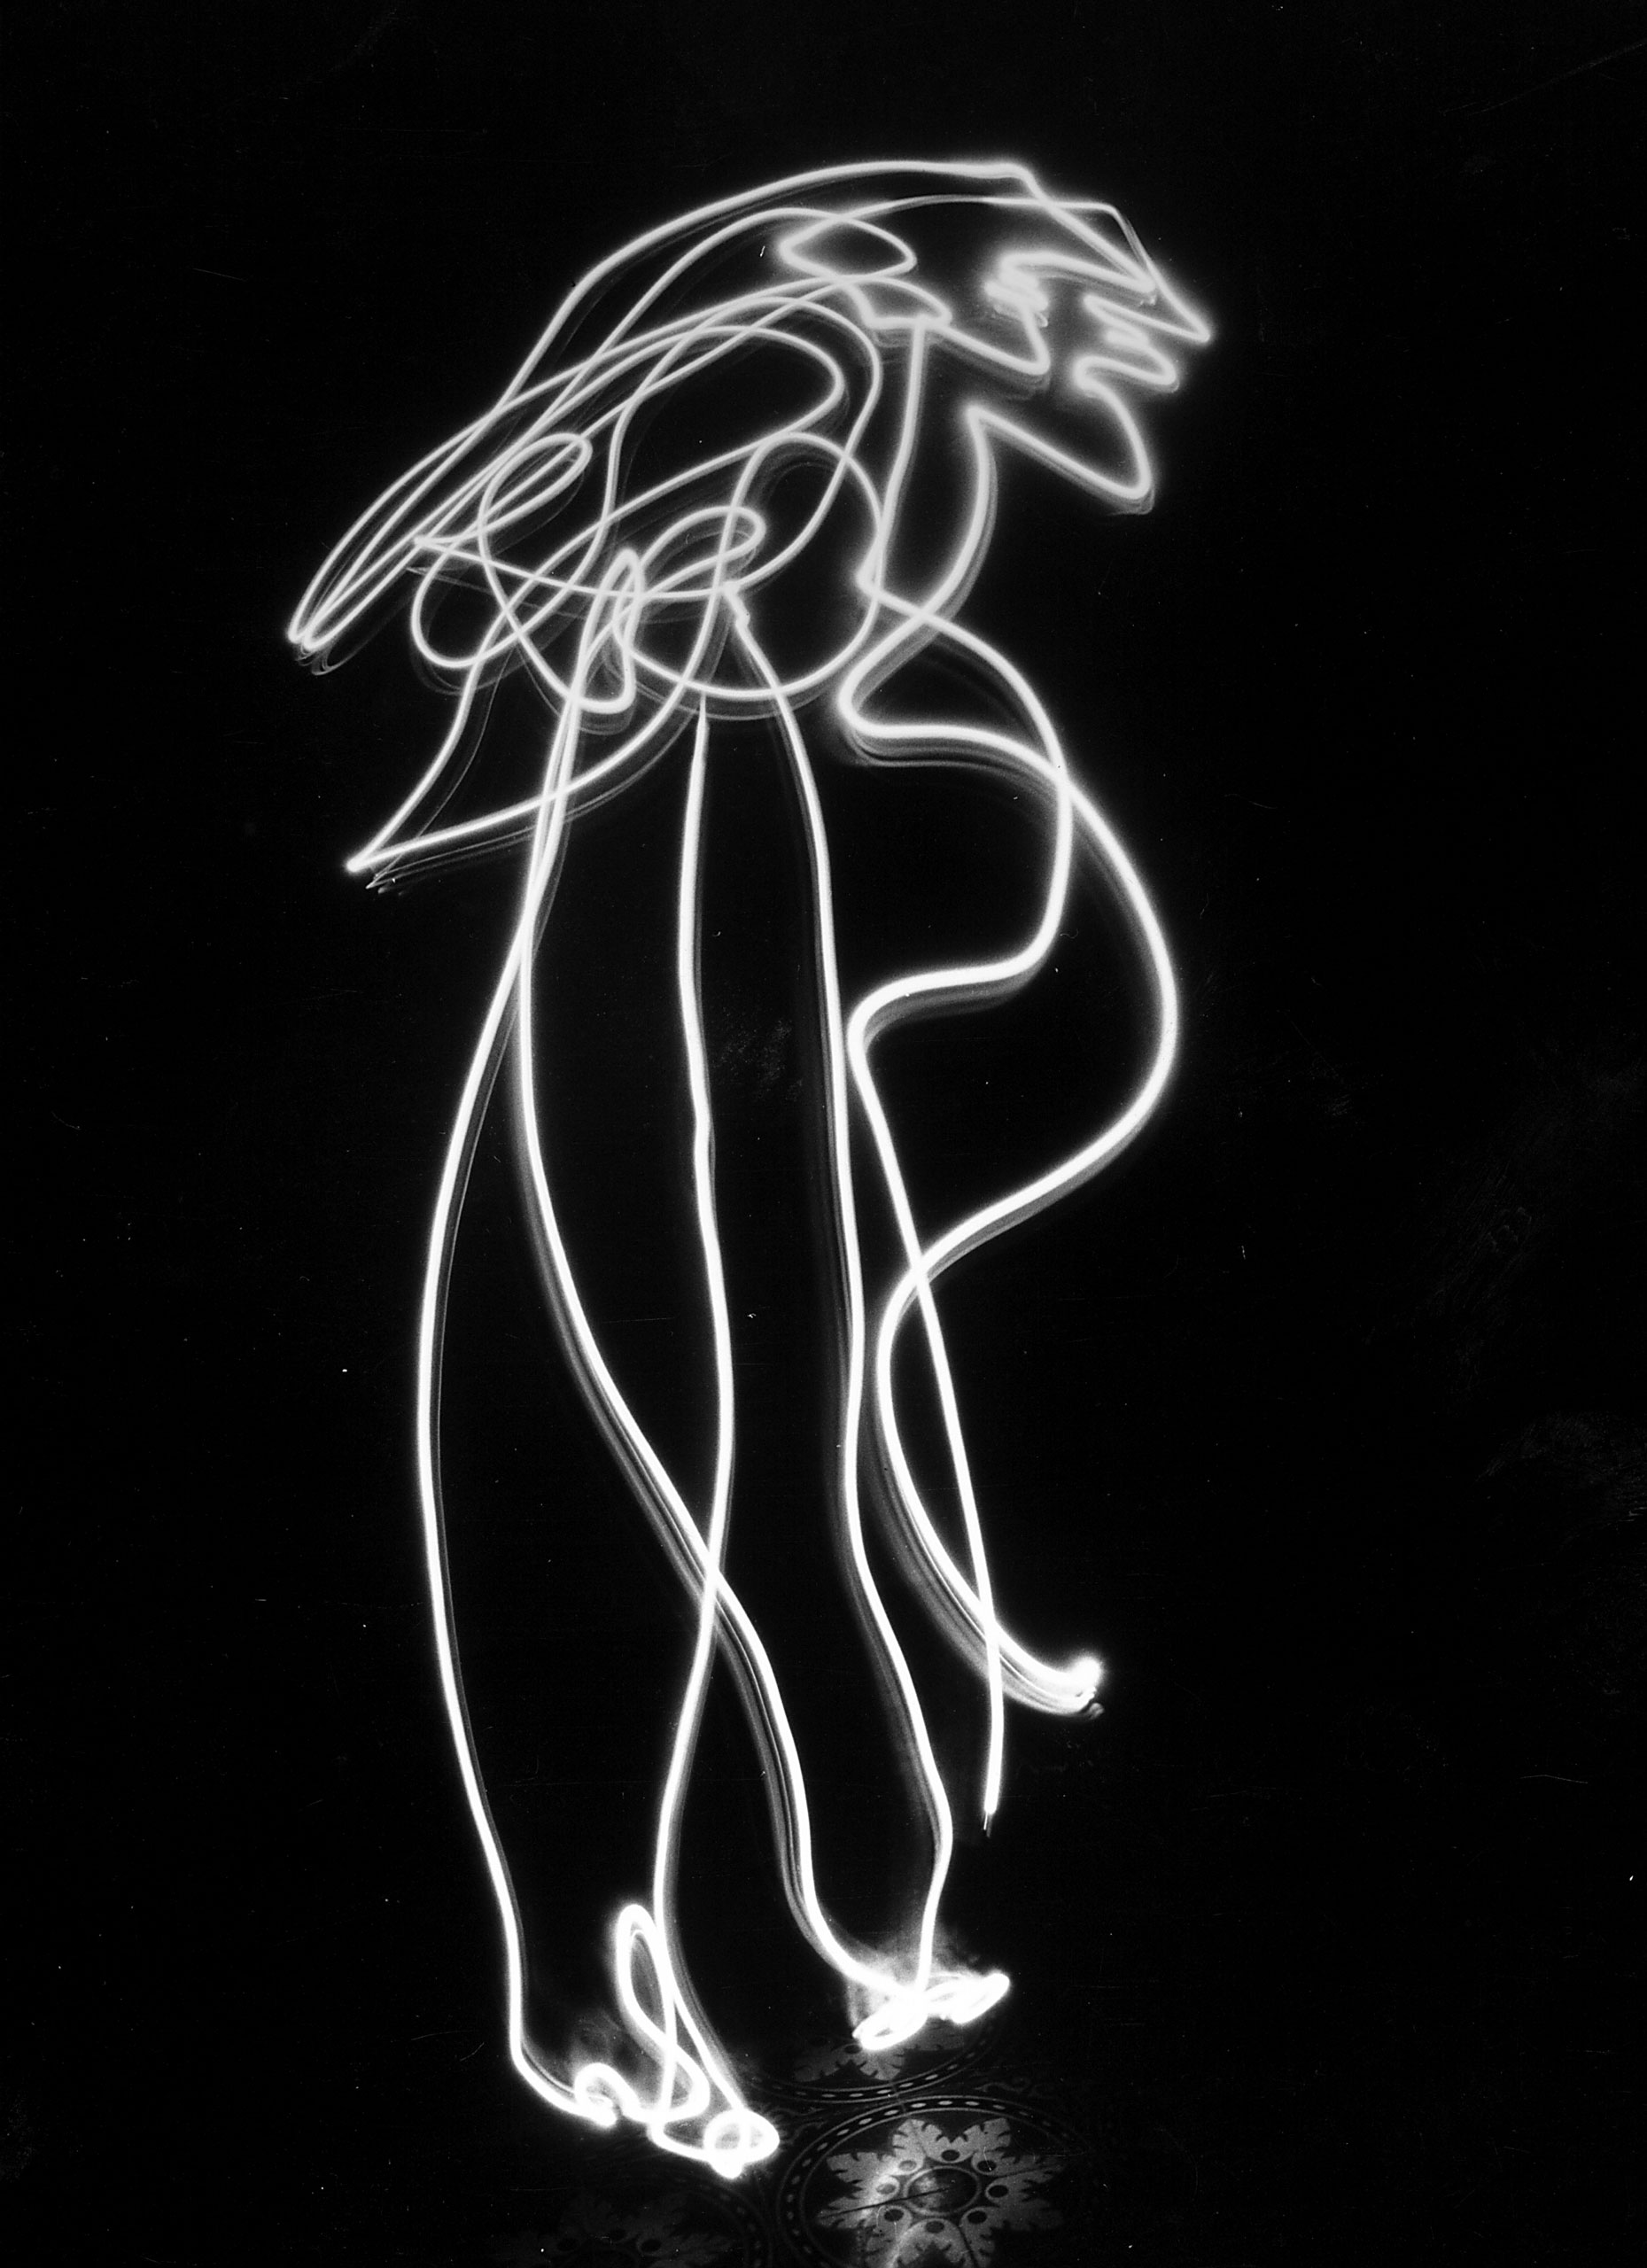 A Pablo Picasso light drawing, 1949.